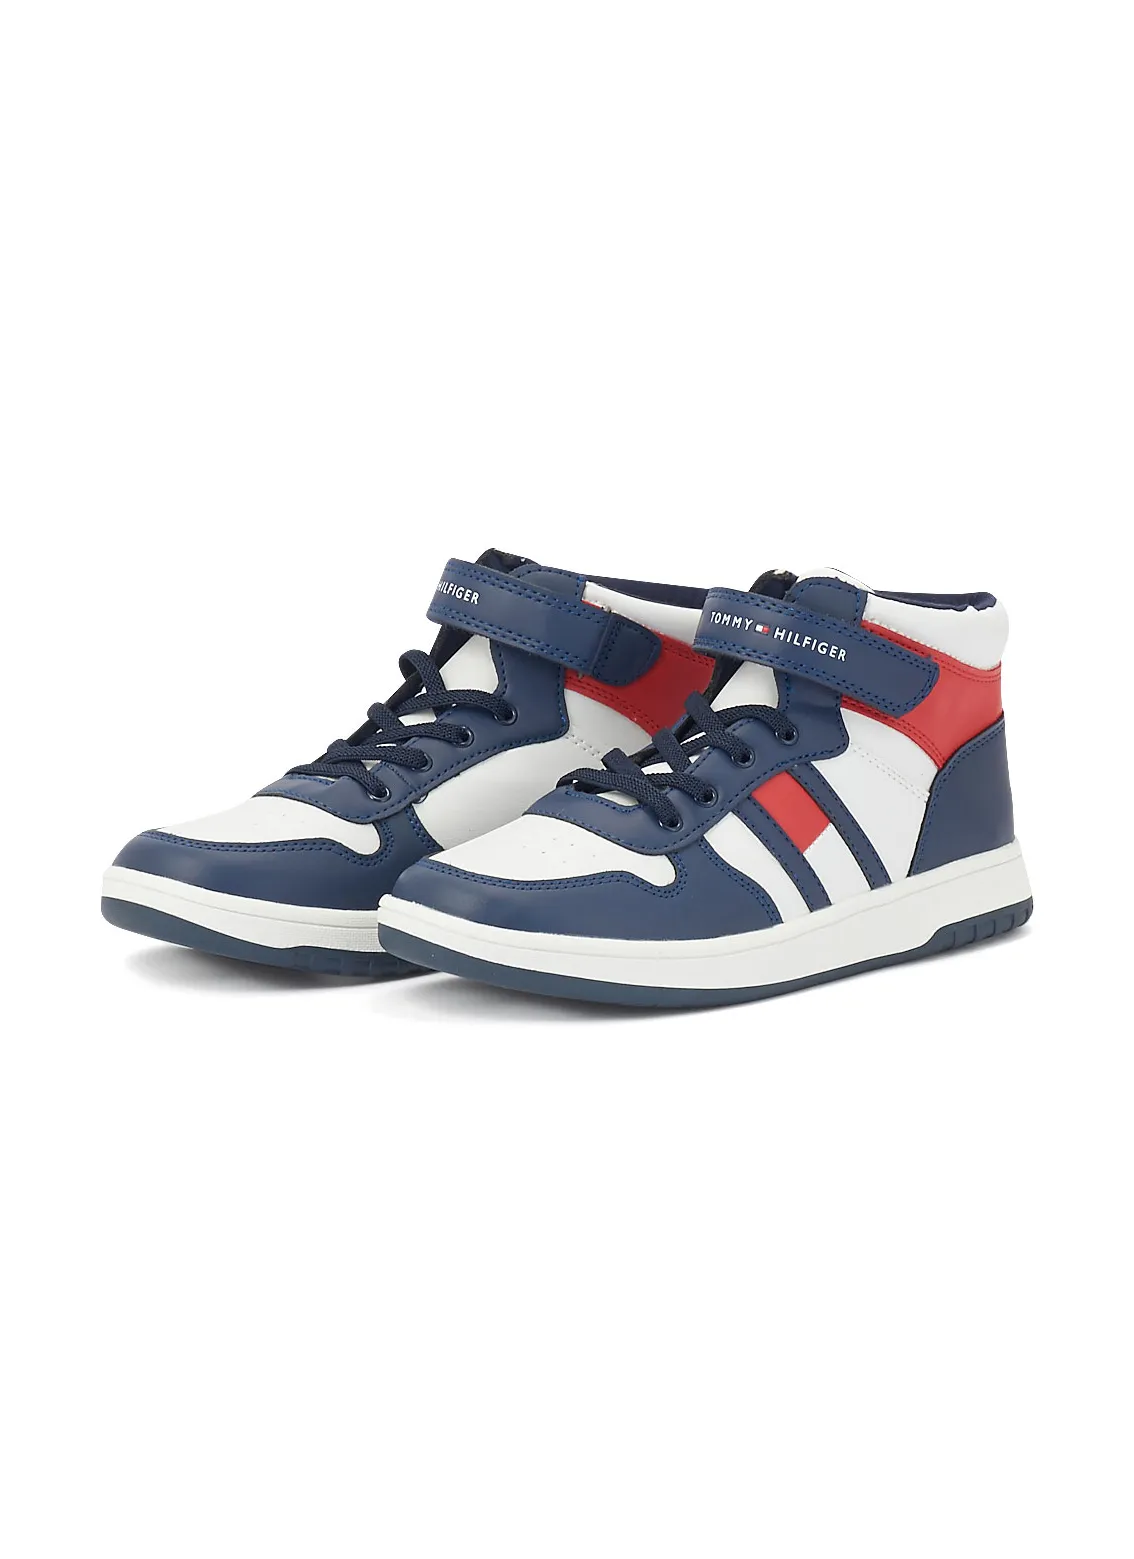 TOMMY HILFIGER High Top Lace up/Velcro Youth Sneakers - Blue/White/Red |  Choice+Attitude